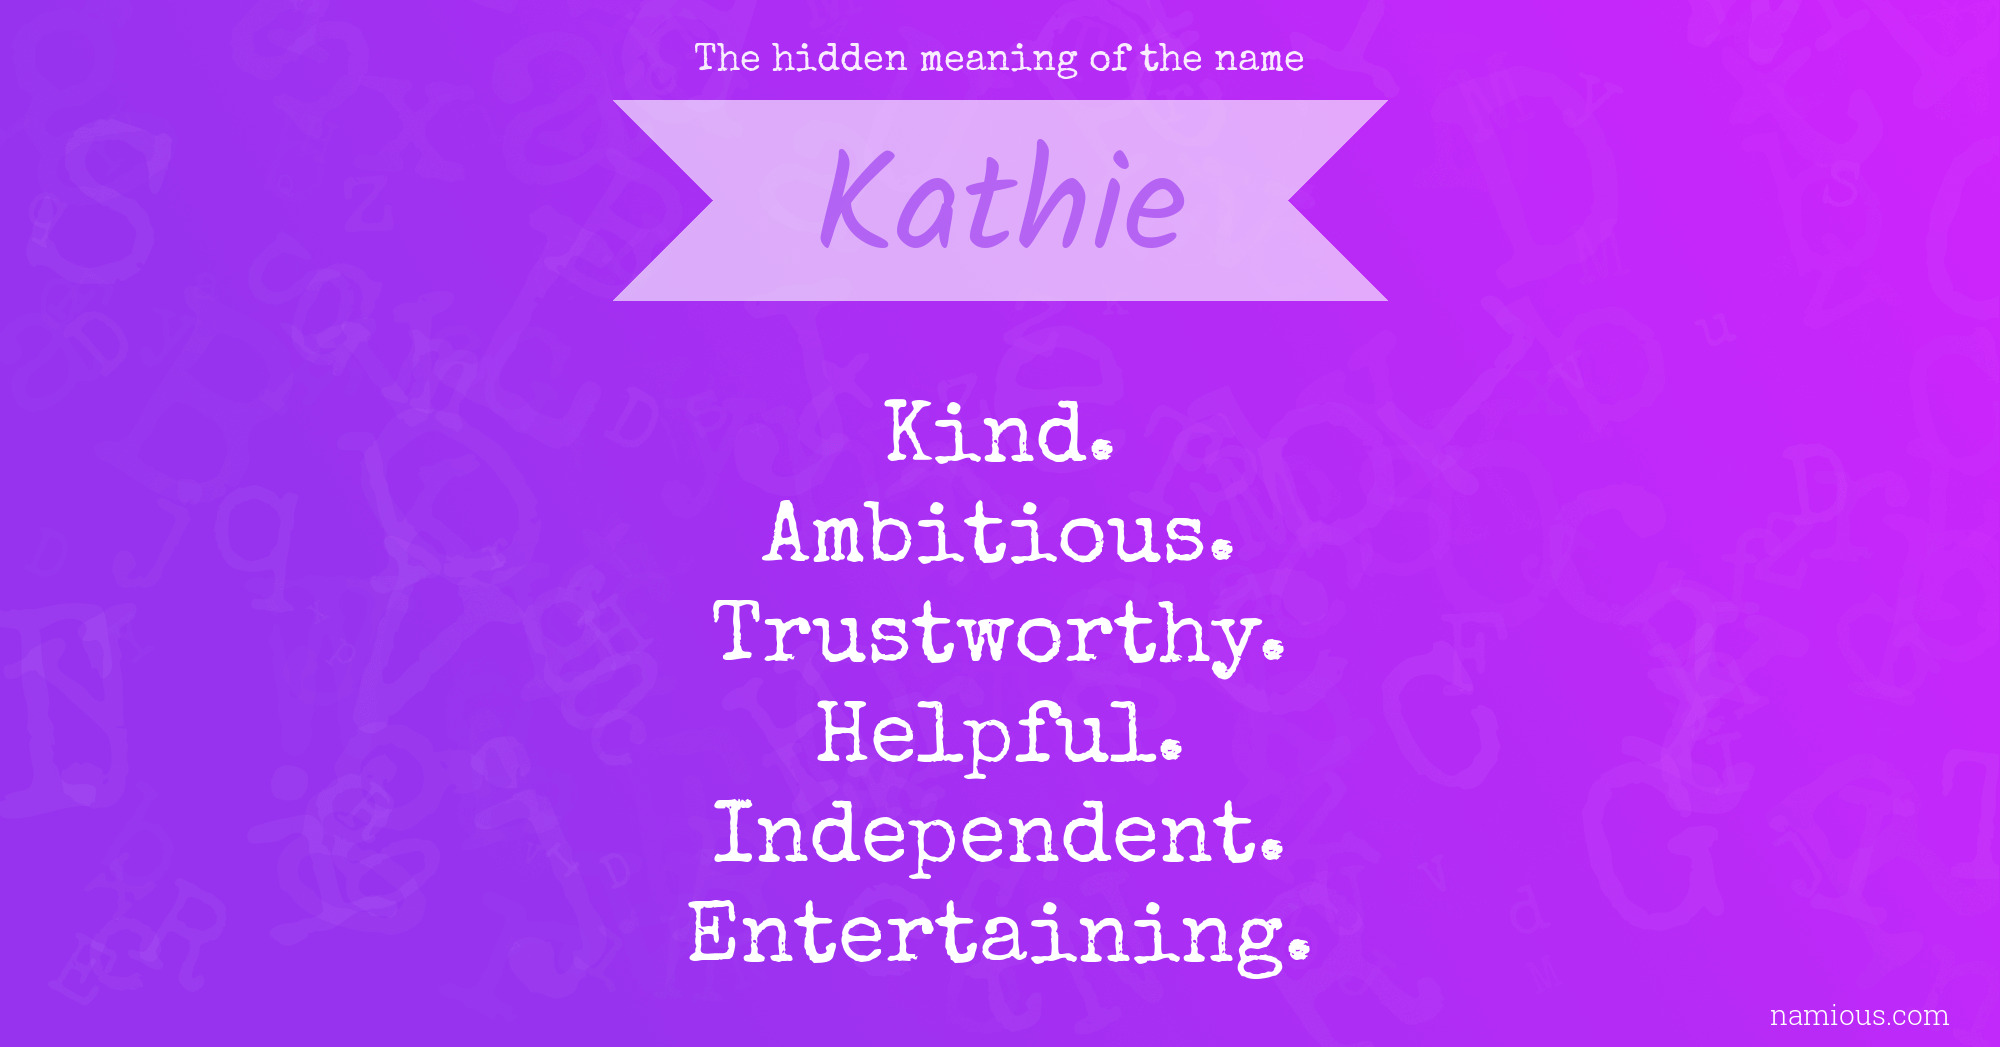 The hidden meaning of the name Kathie